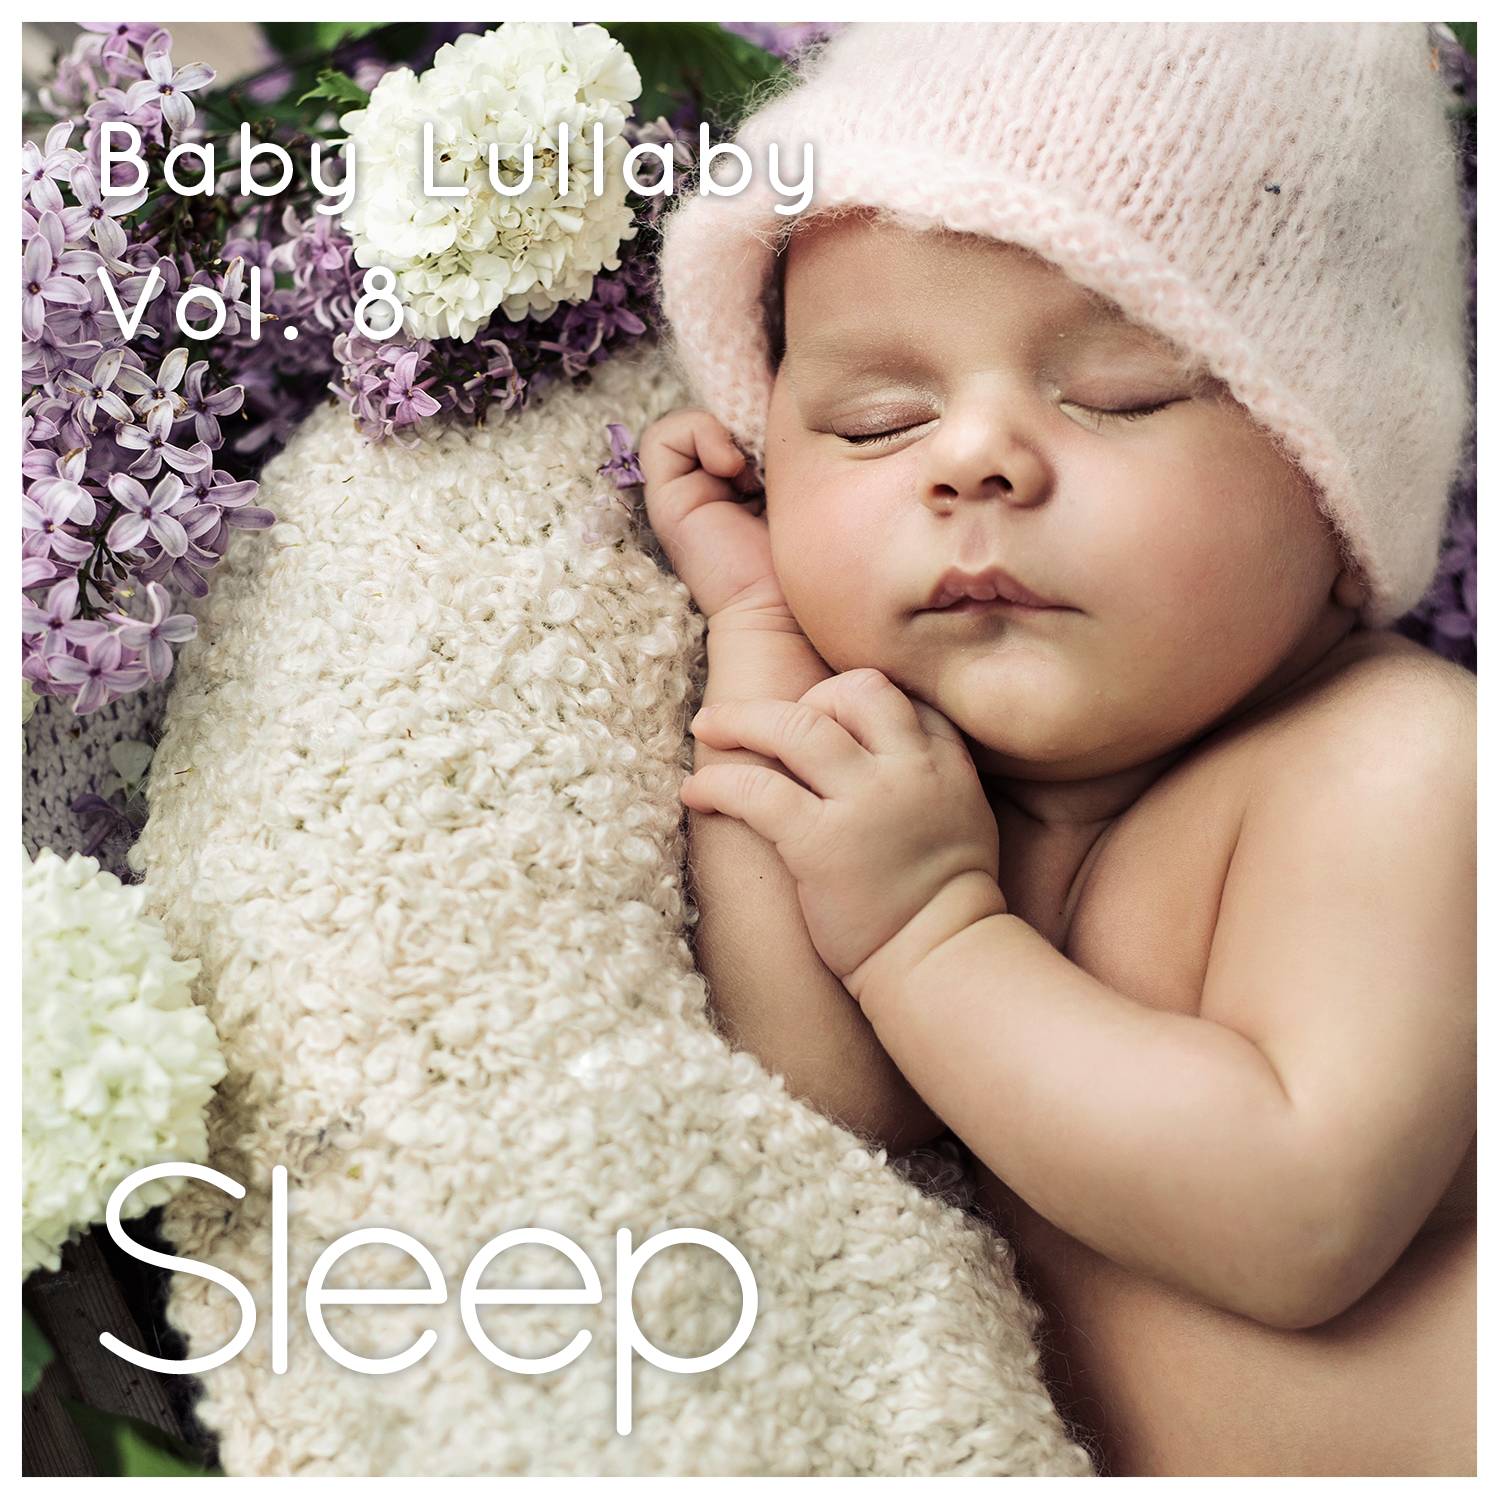 Baby Sleep Ambient Lullaby, Pt. 36